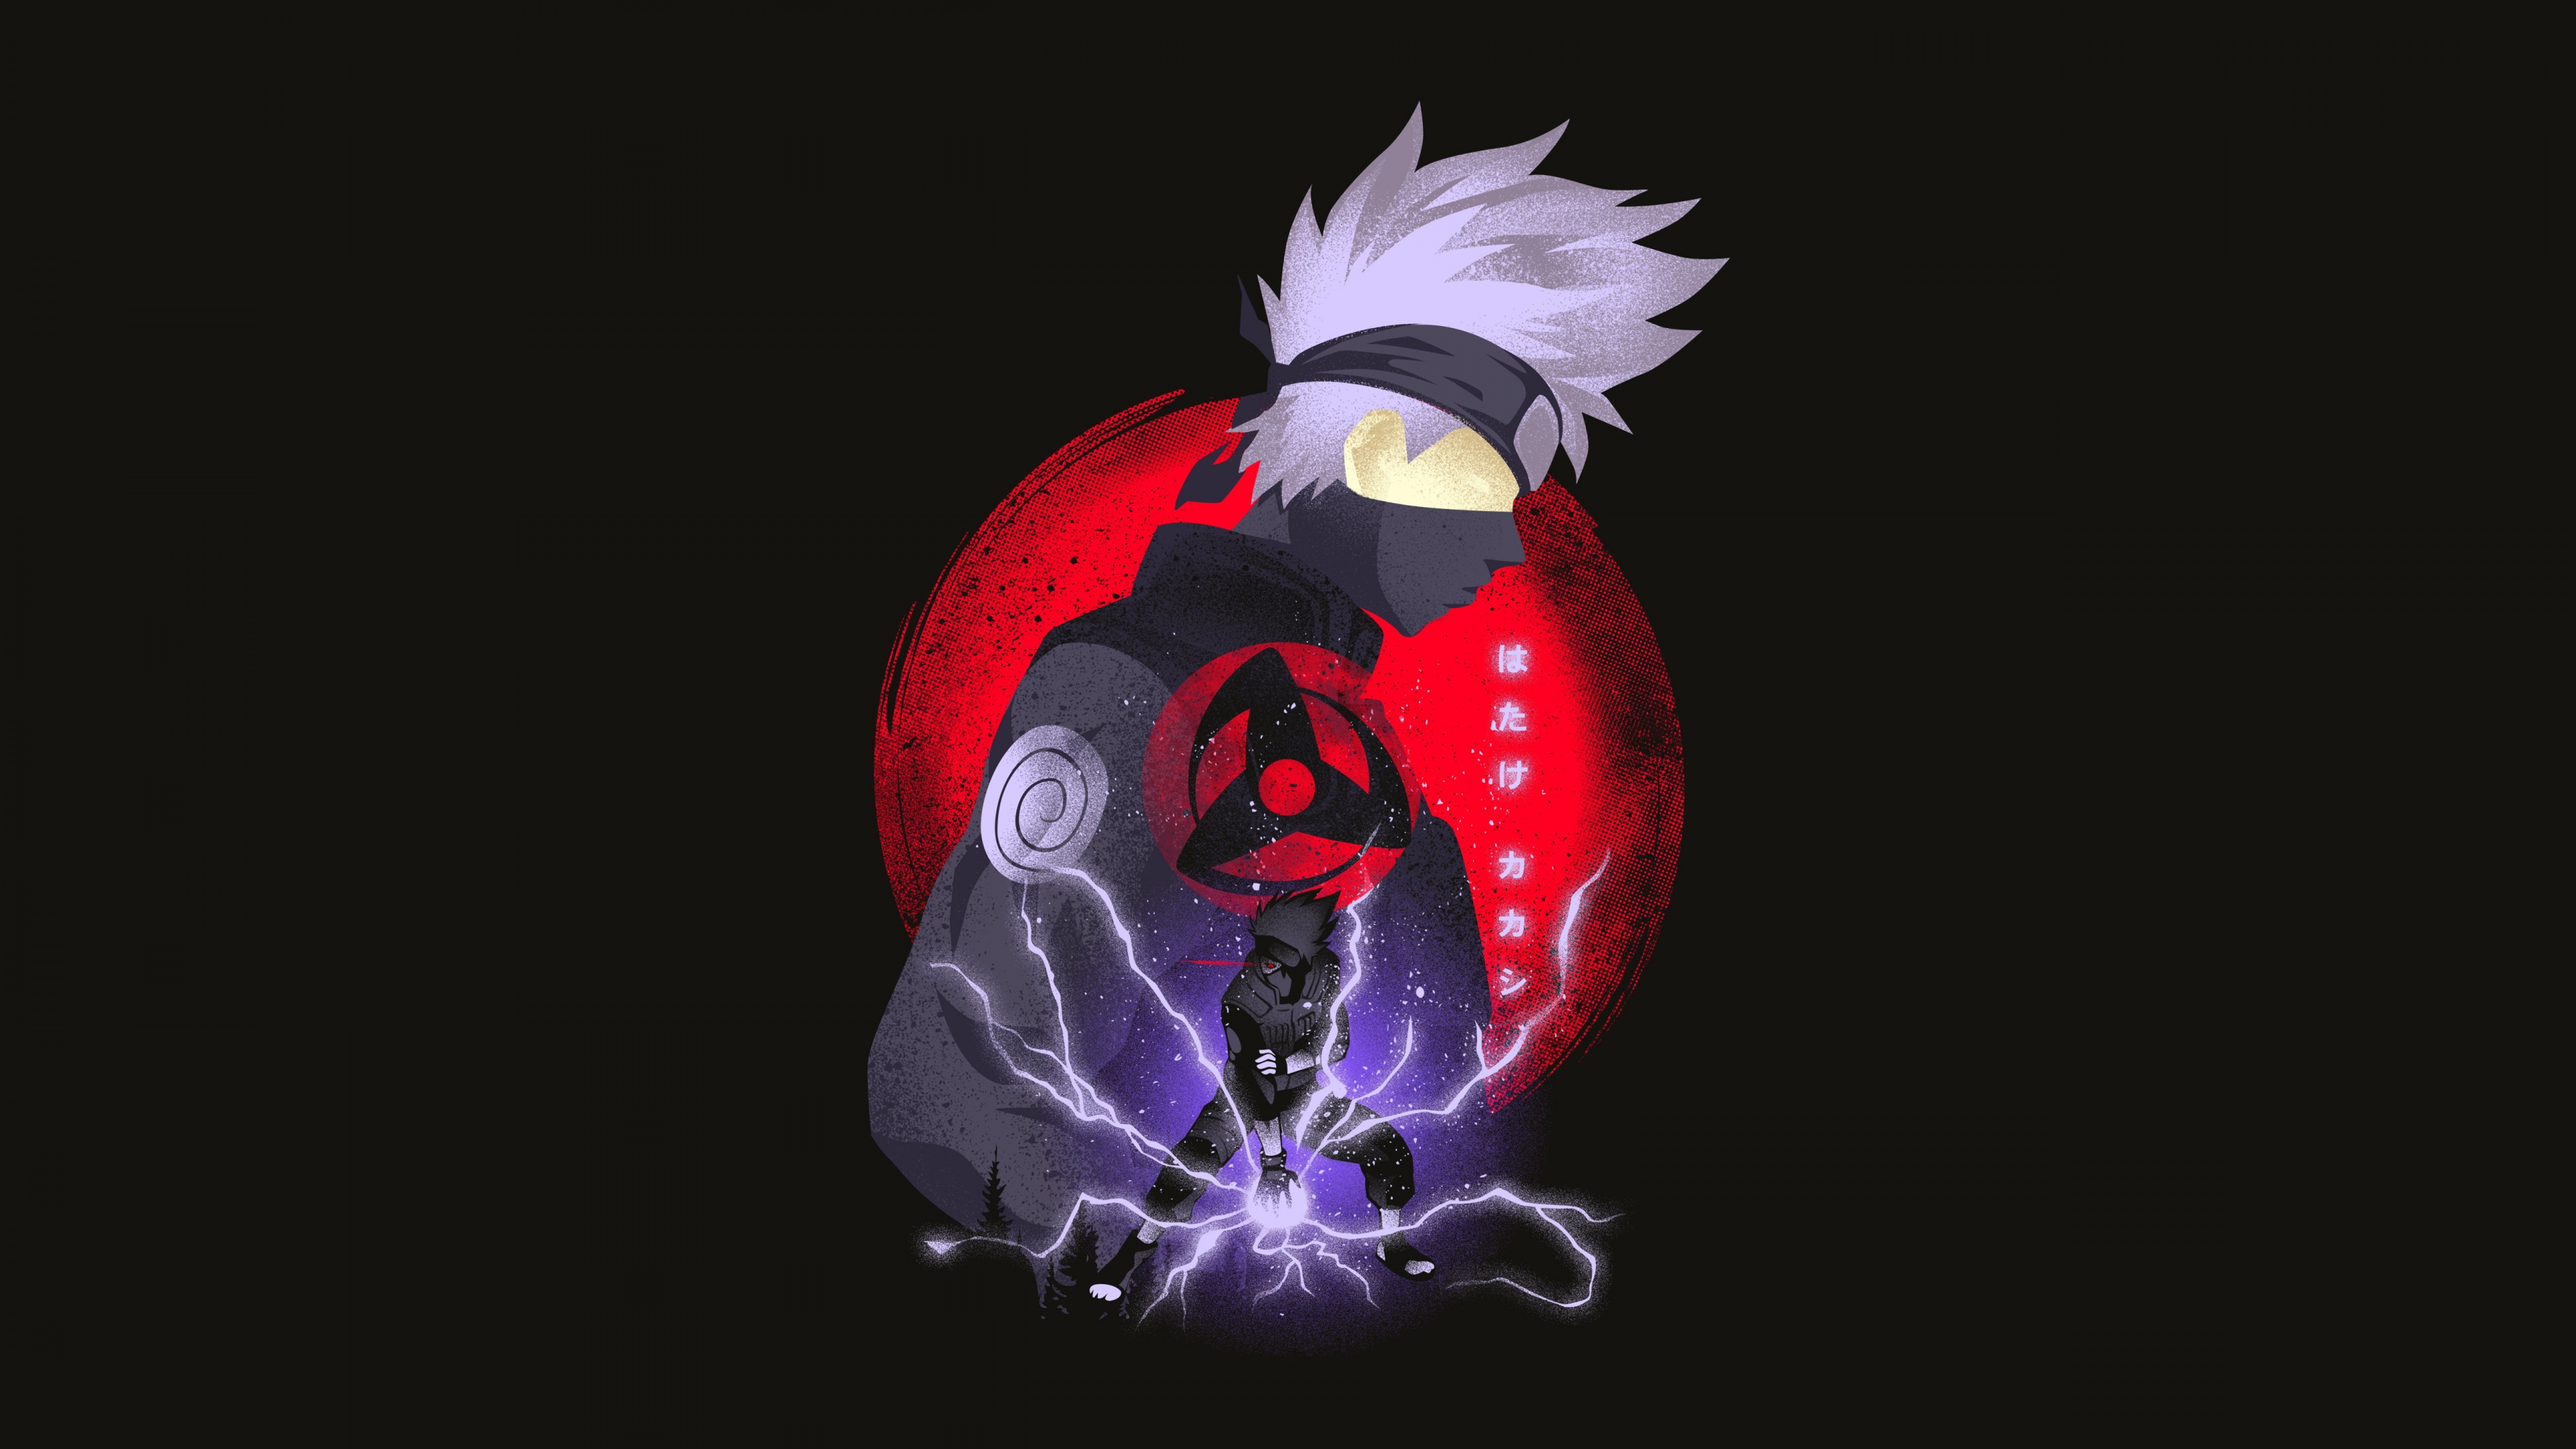 91+ Kakashi Hatake Wallpapers for iPhone and Android by Paul Tate